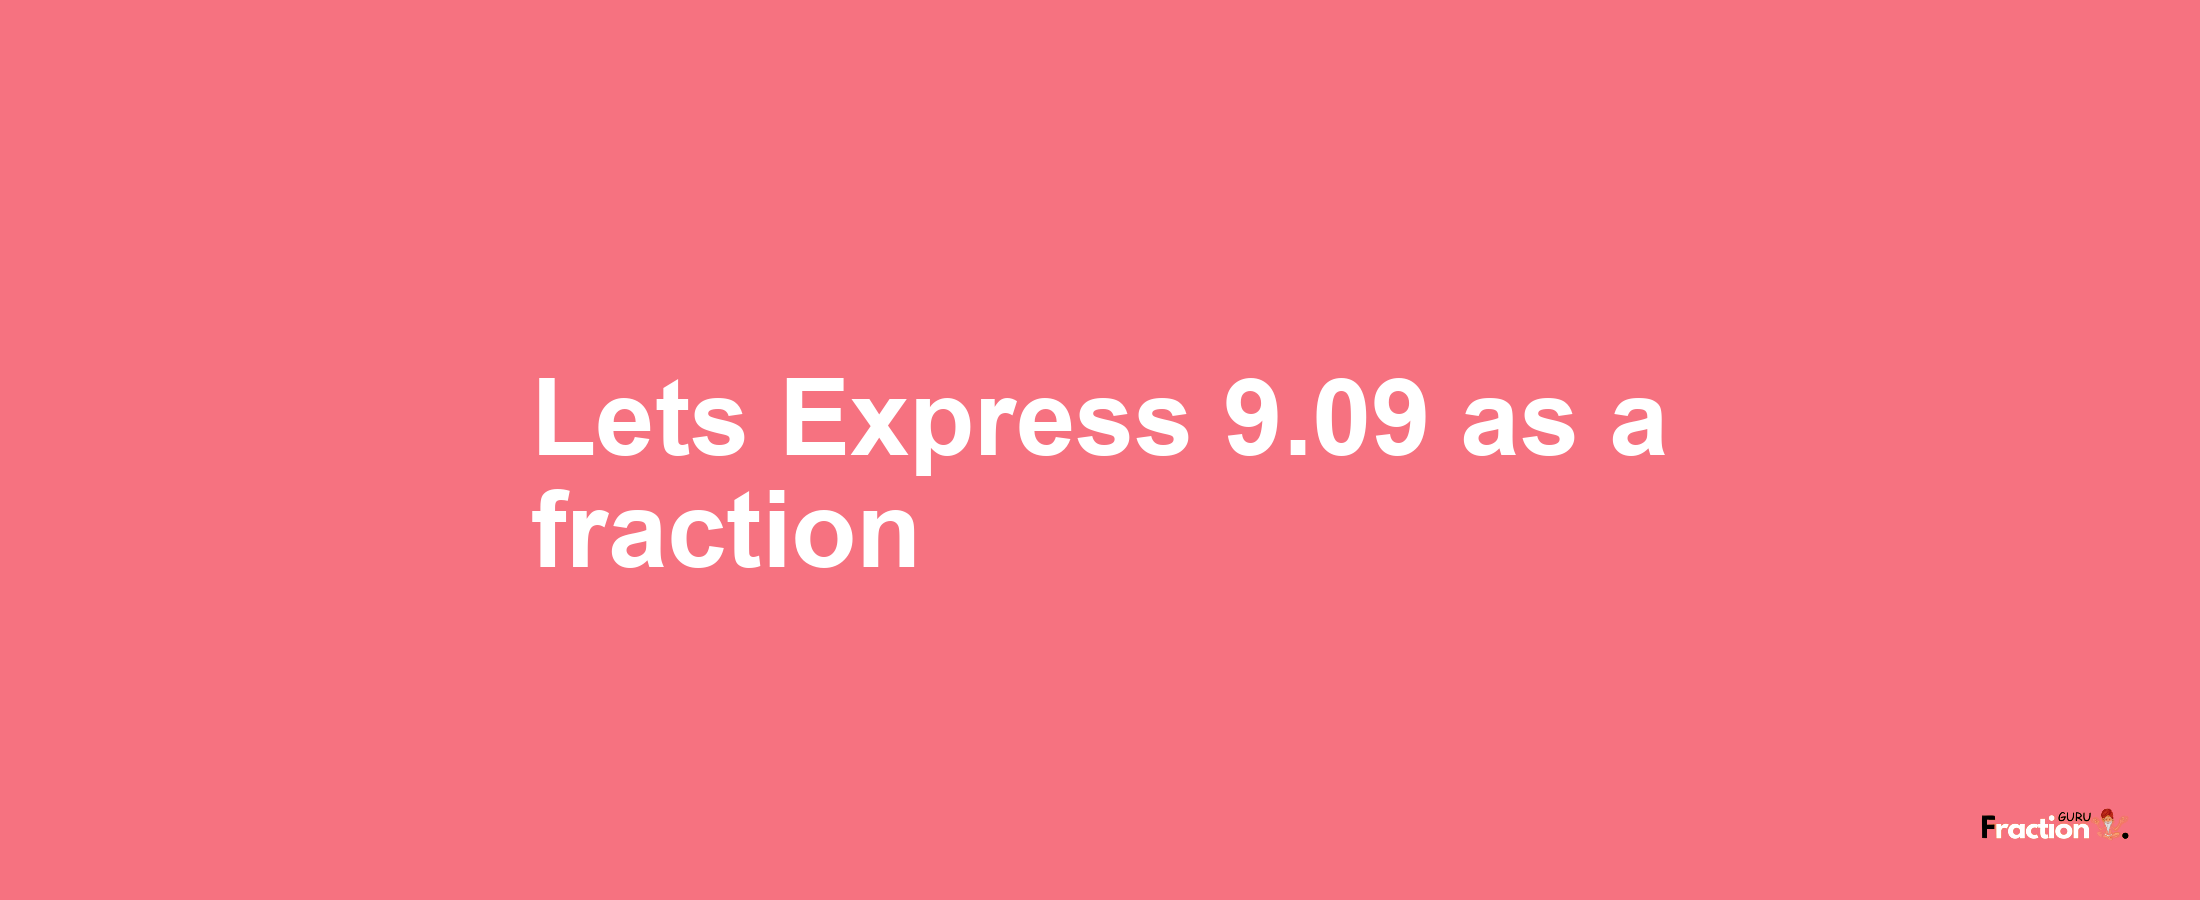 Lets Express 9.09 as afraction